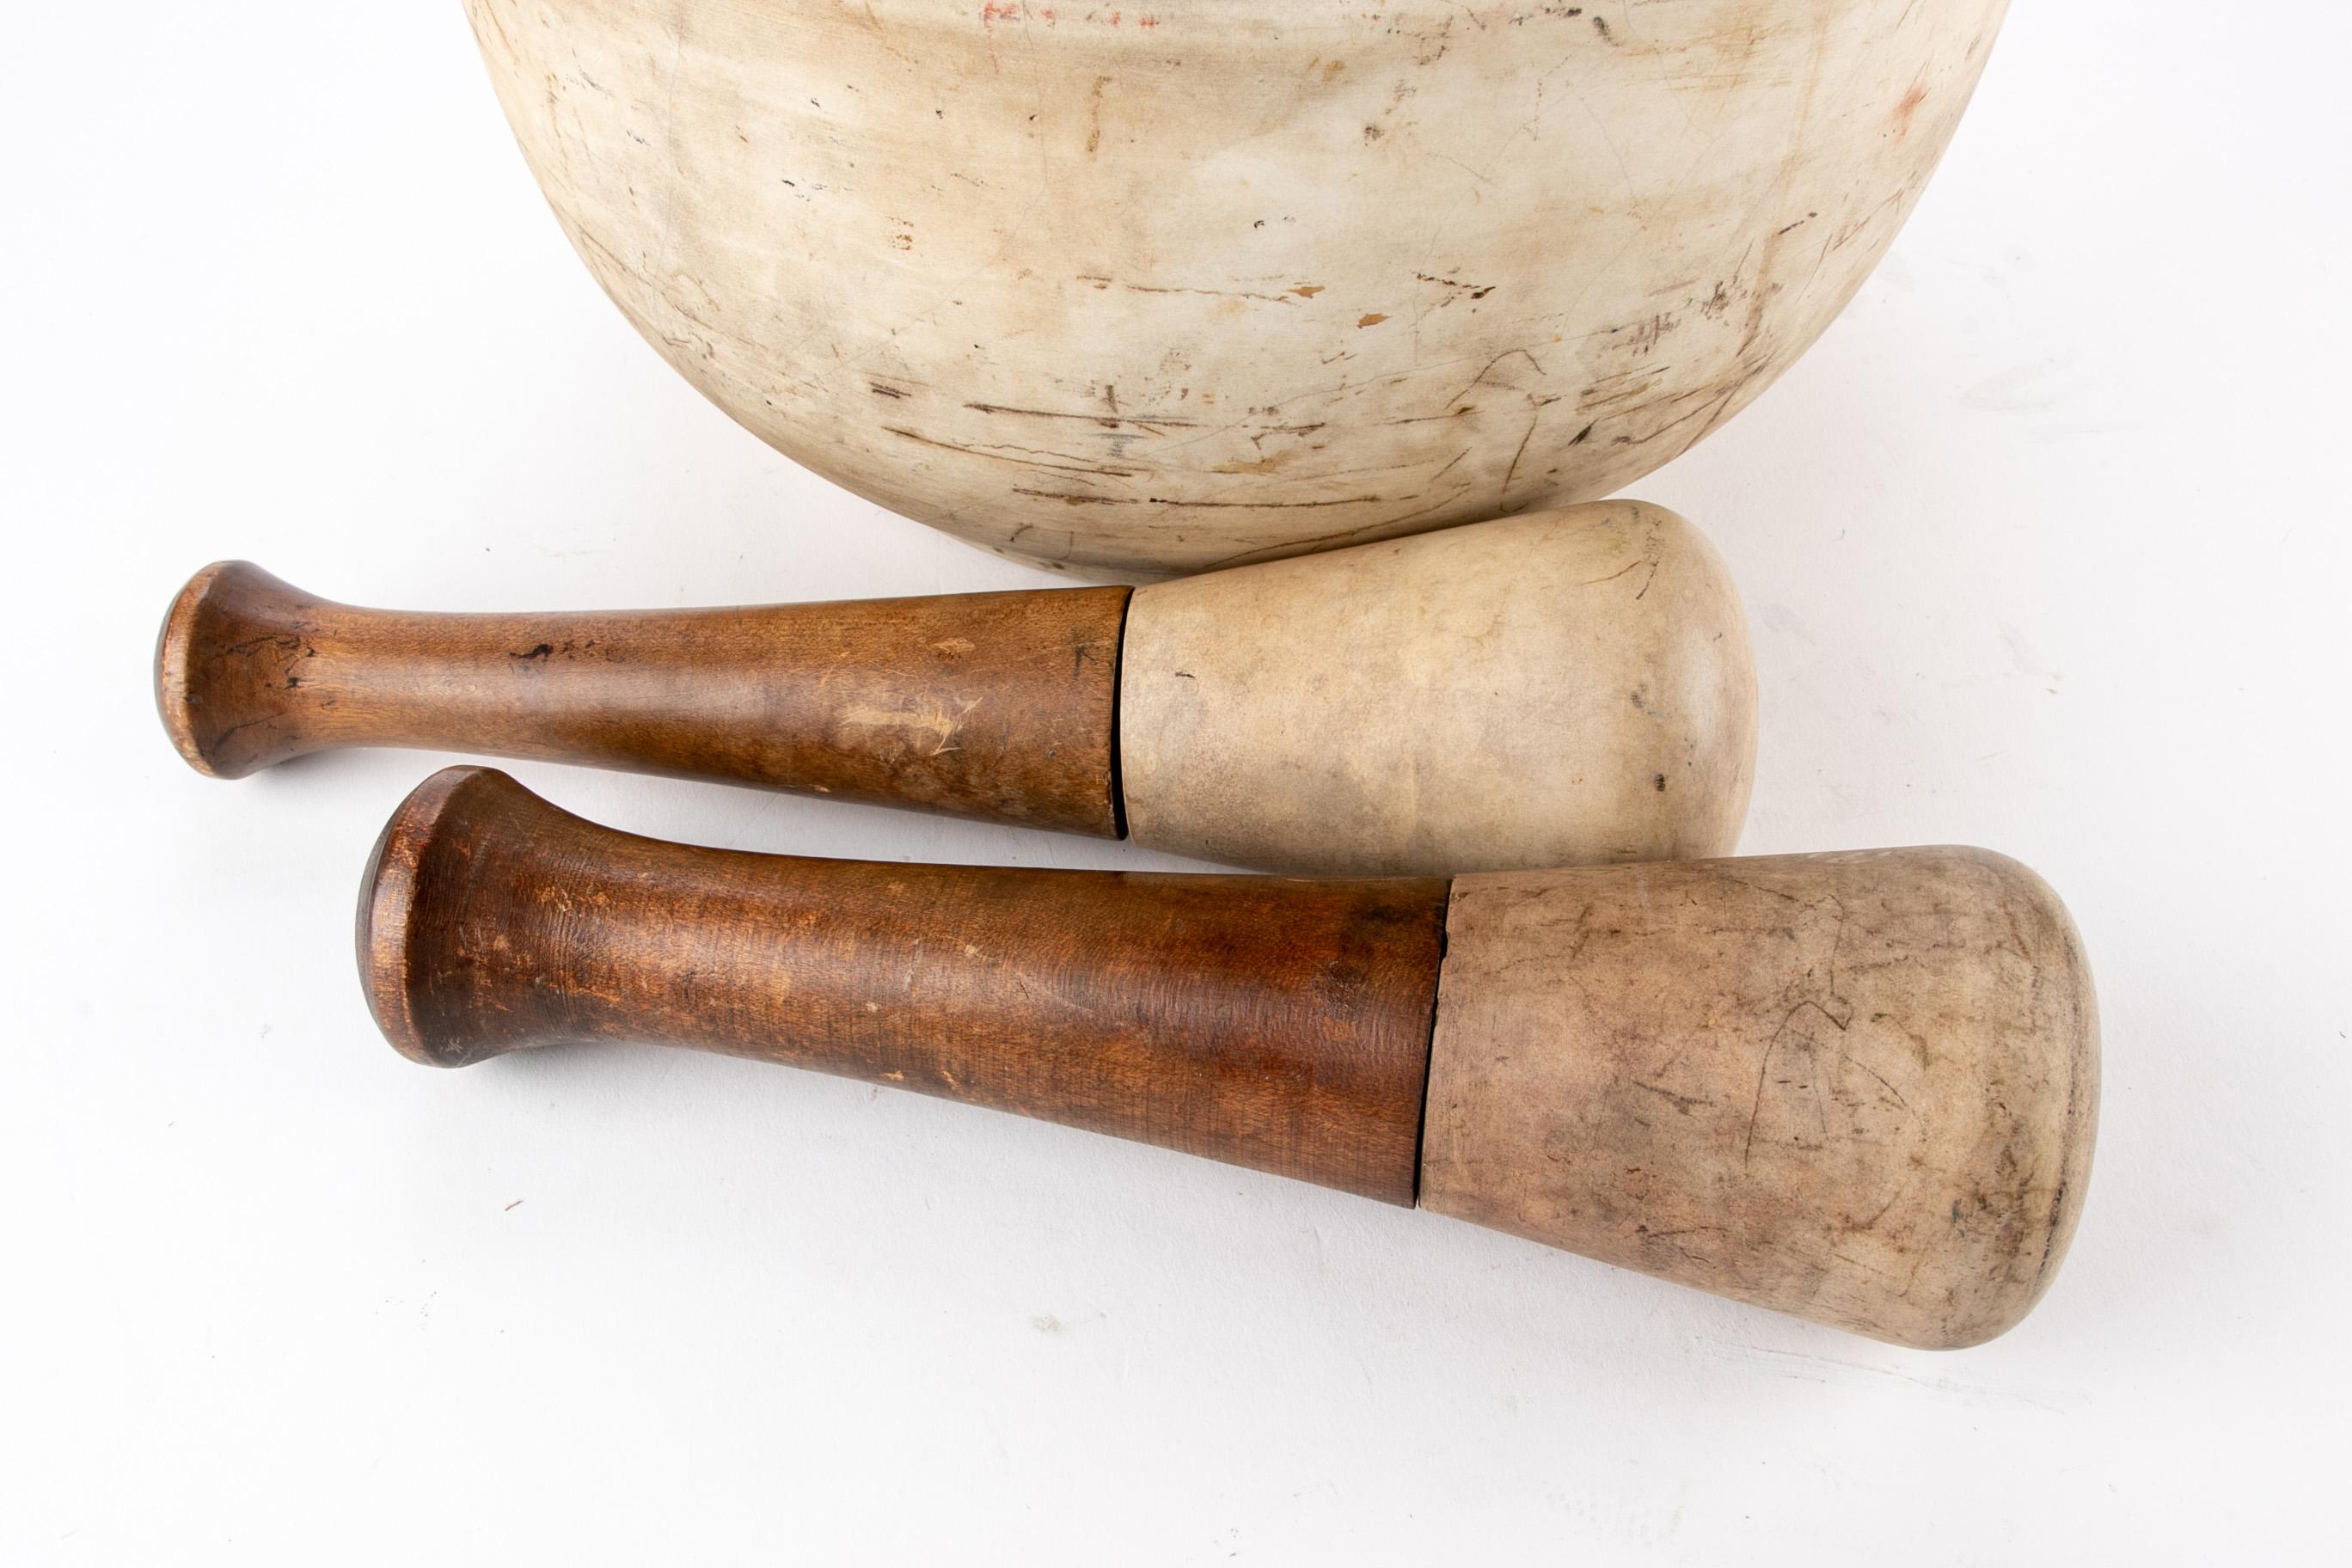 Large Scale Antique Heavy Ceramic Mortar and Two Pestles 2